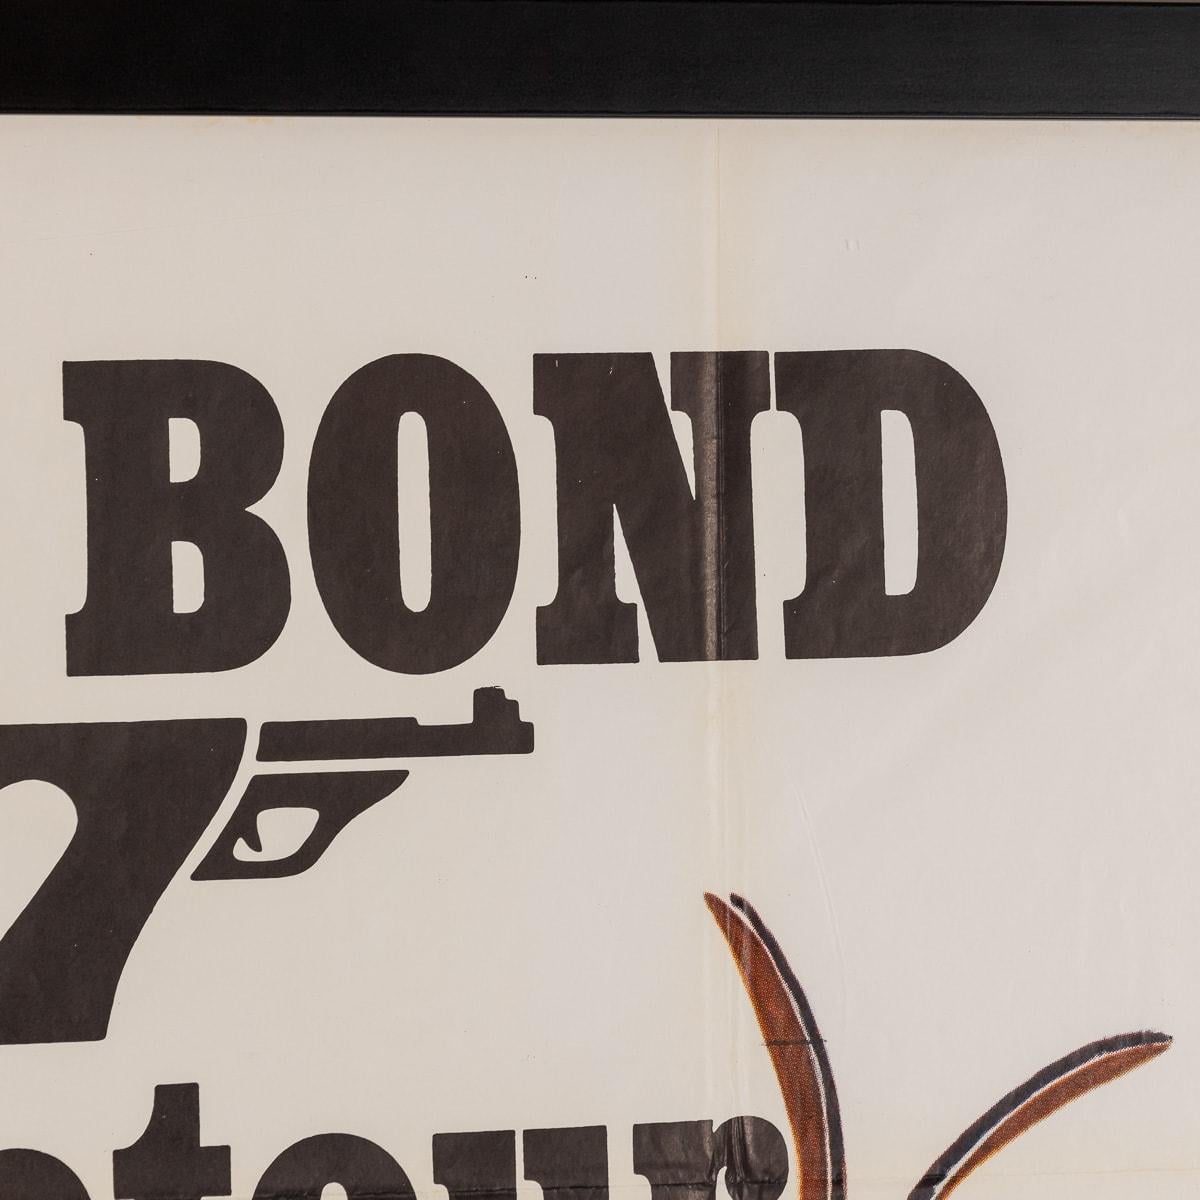 Original French Release James Bond On Her Majesty's Secret Service Poster c.1969 In Good Condition For Sale In Royal Tunbridge Wells, Kent